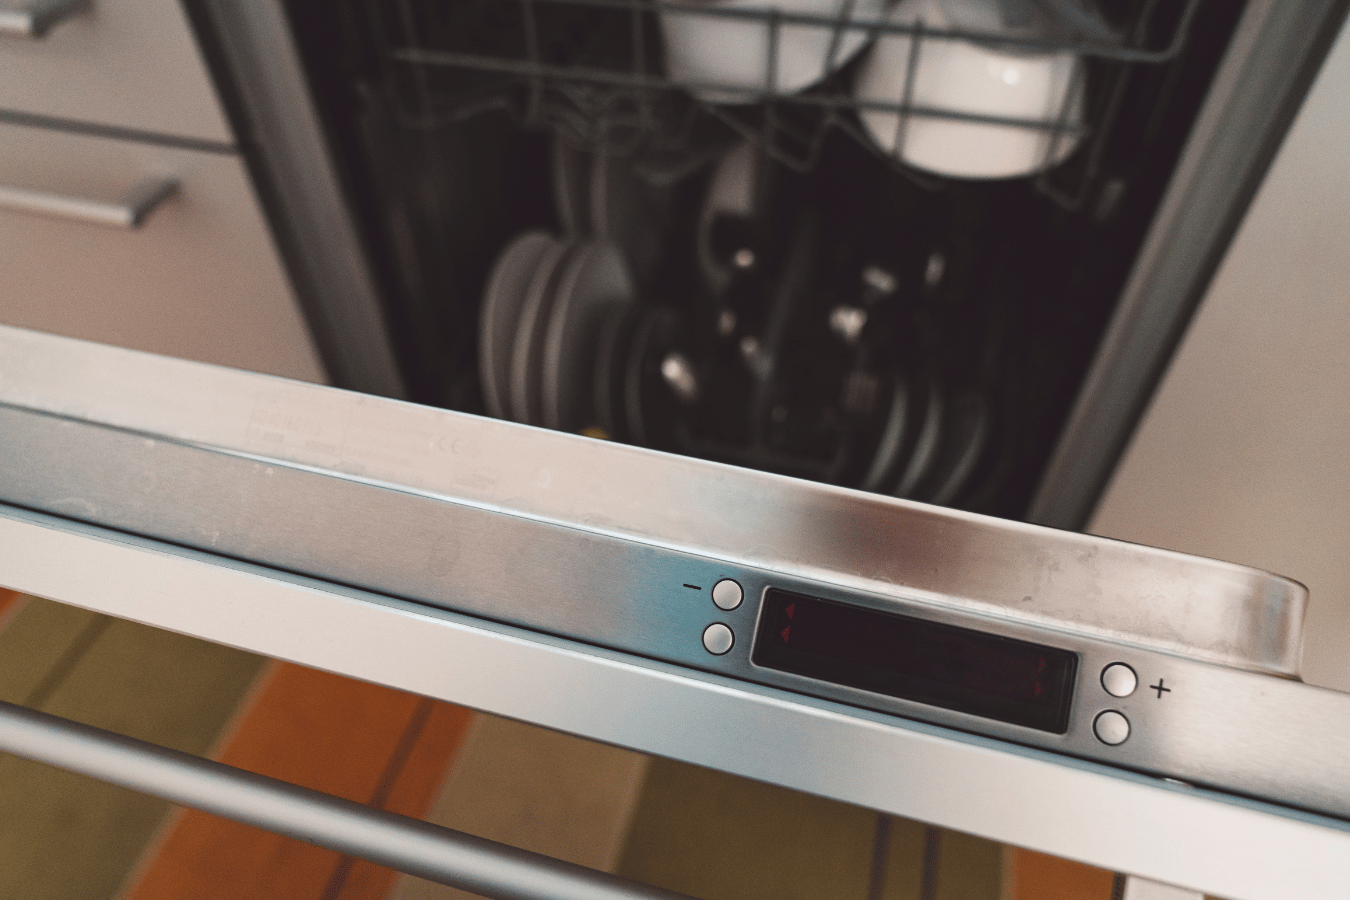 A close up of a dishwasher with the door open